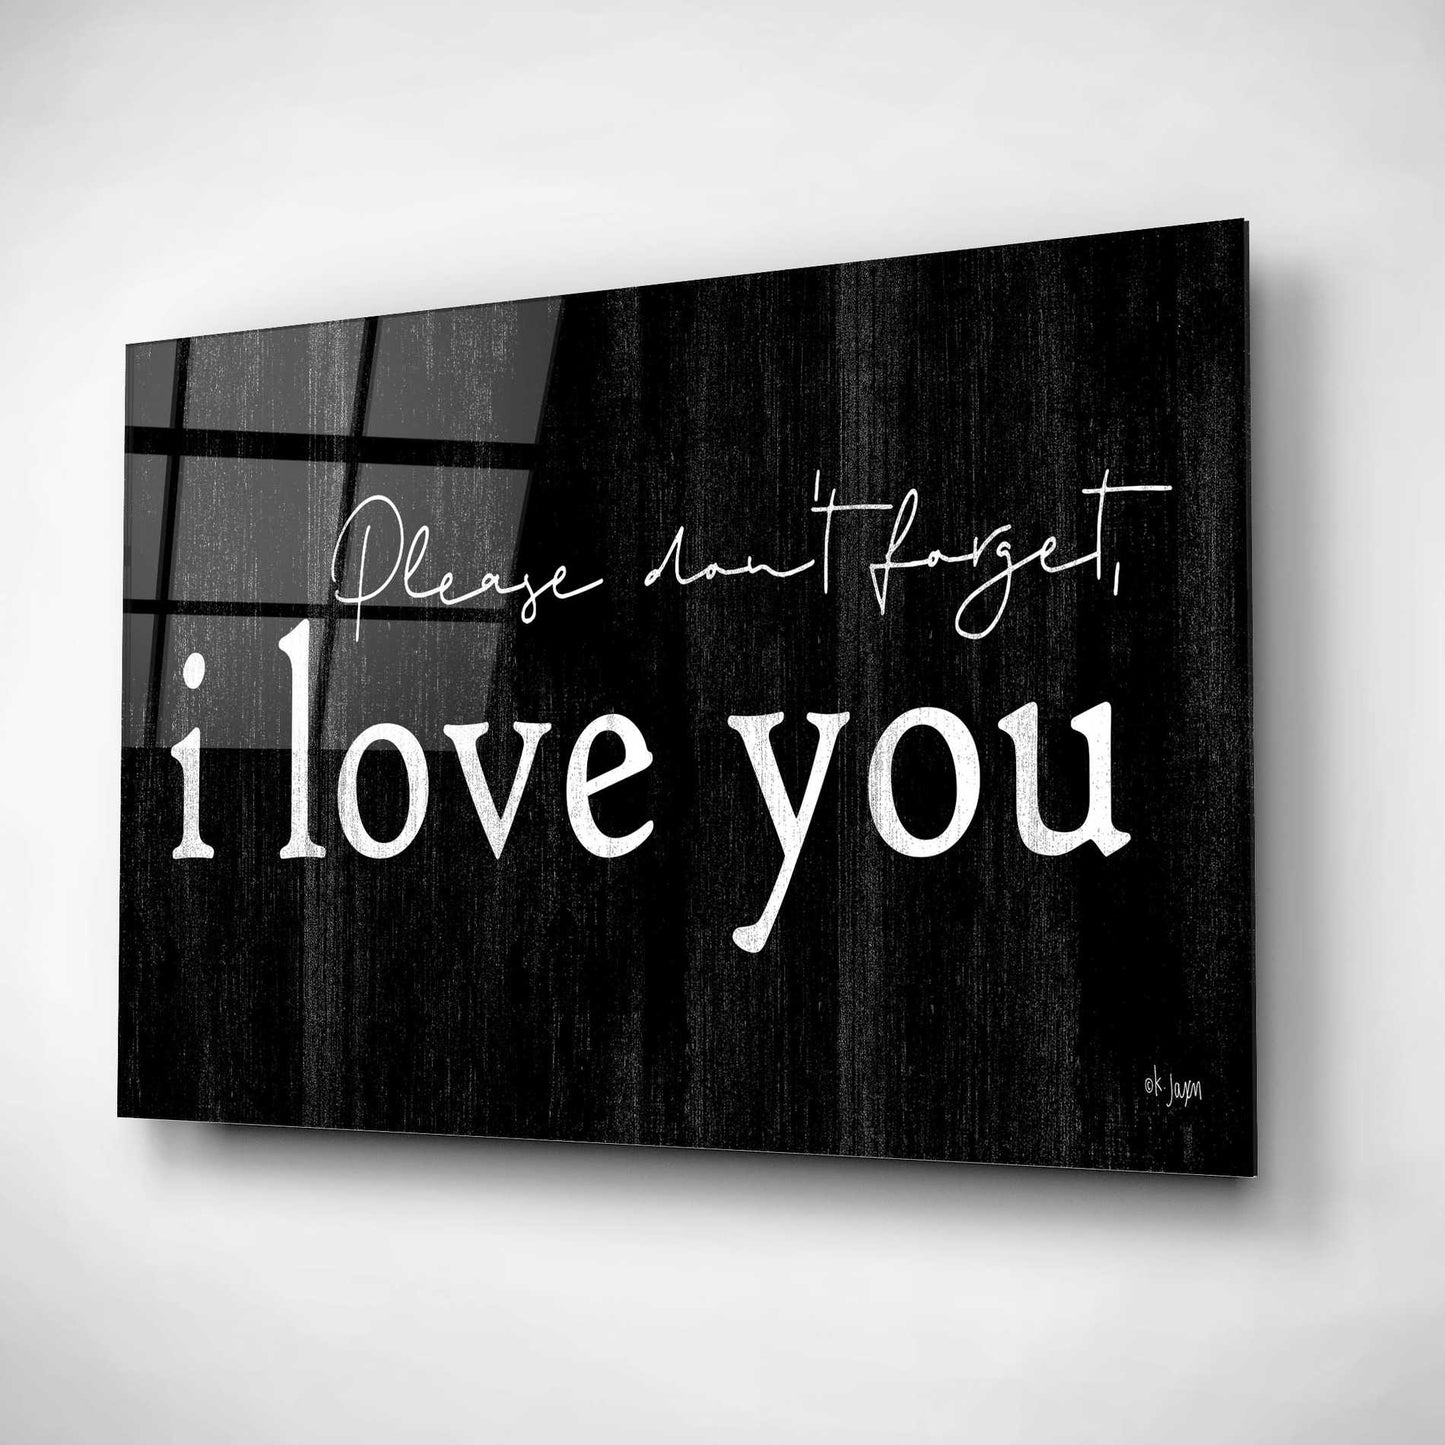 Epic Art 'Please Don't Forget' by Jaxn Blvd, Acrylic Glass Wall Art,24x16